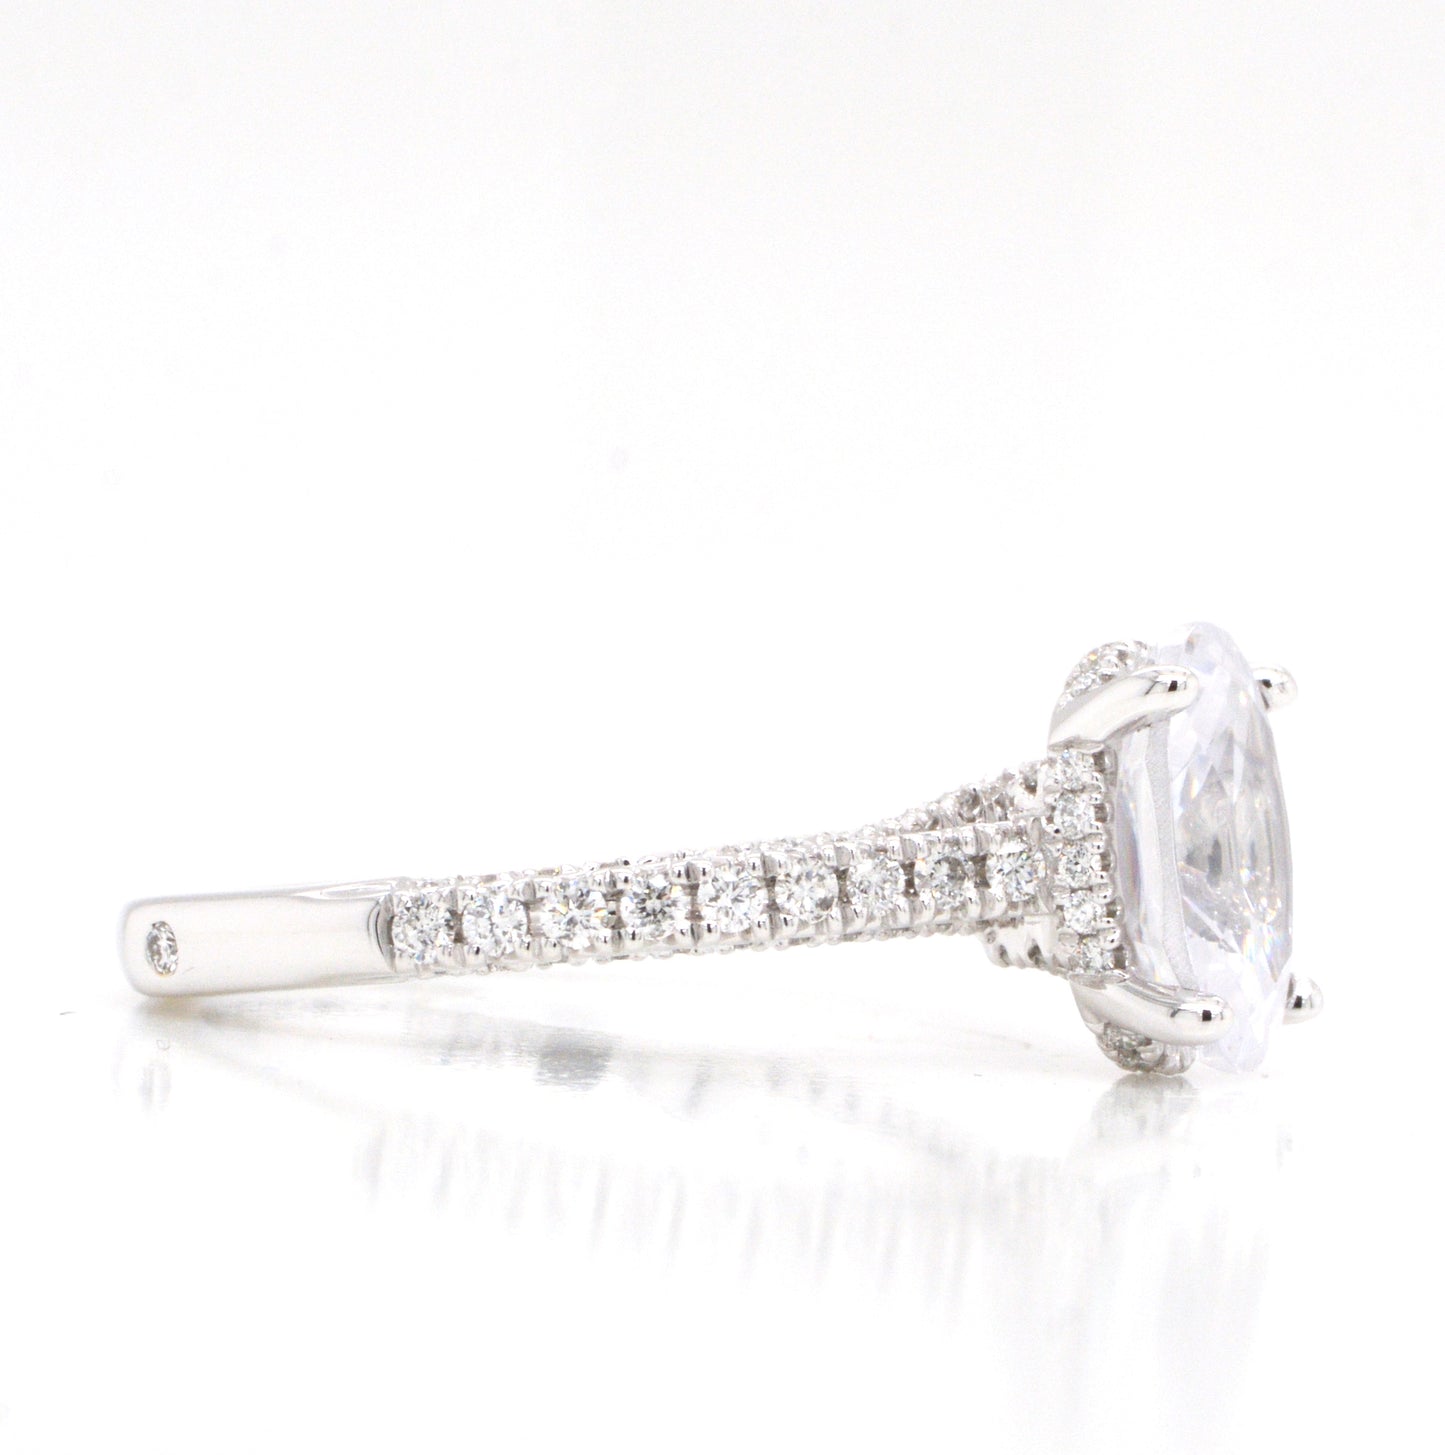 14K White Gold Diamond Engagement Ring with a Hidden Halo and a European Shank